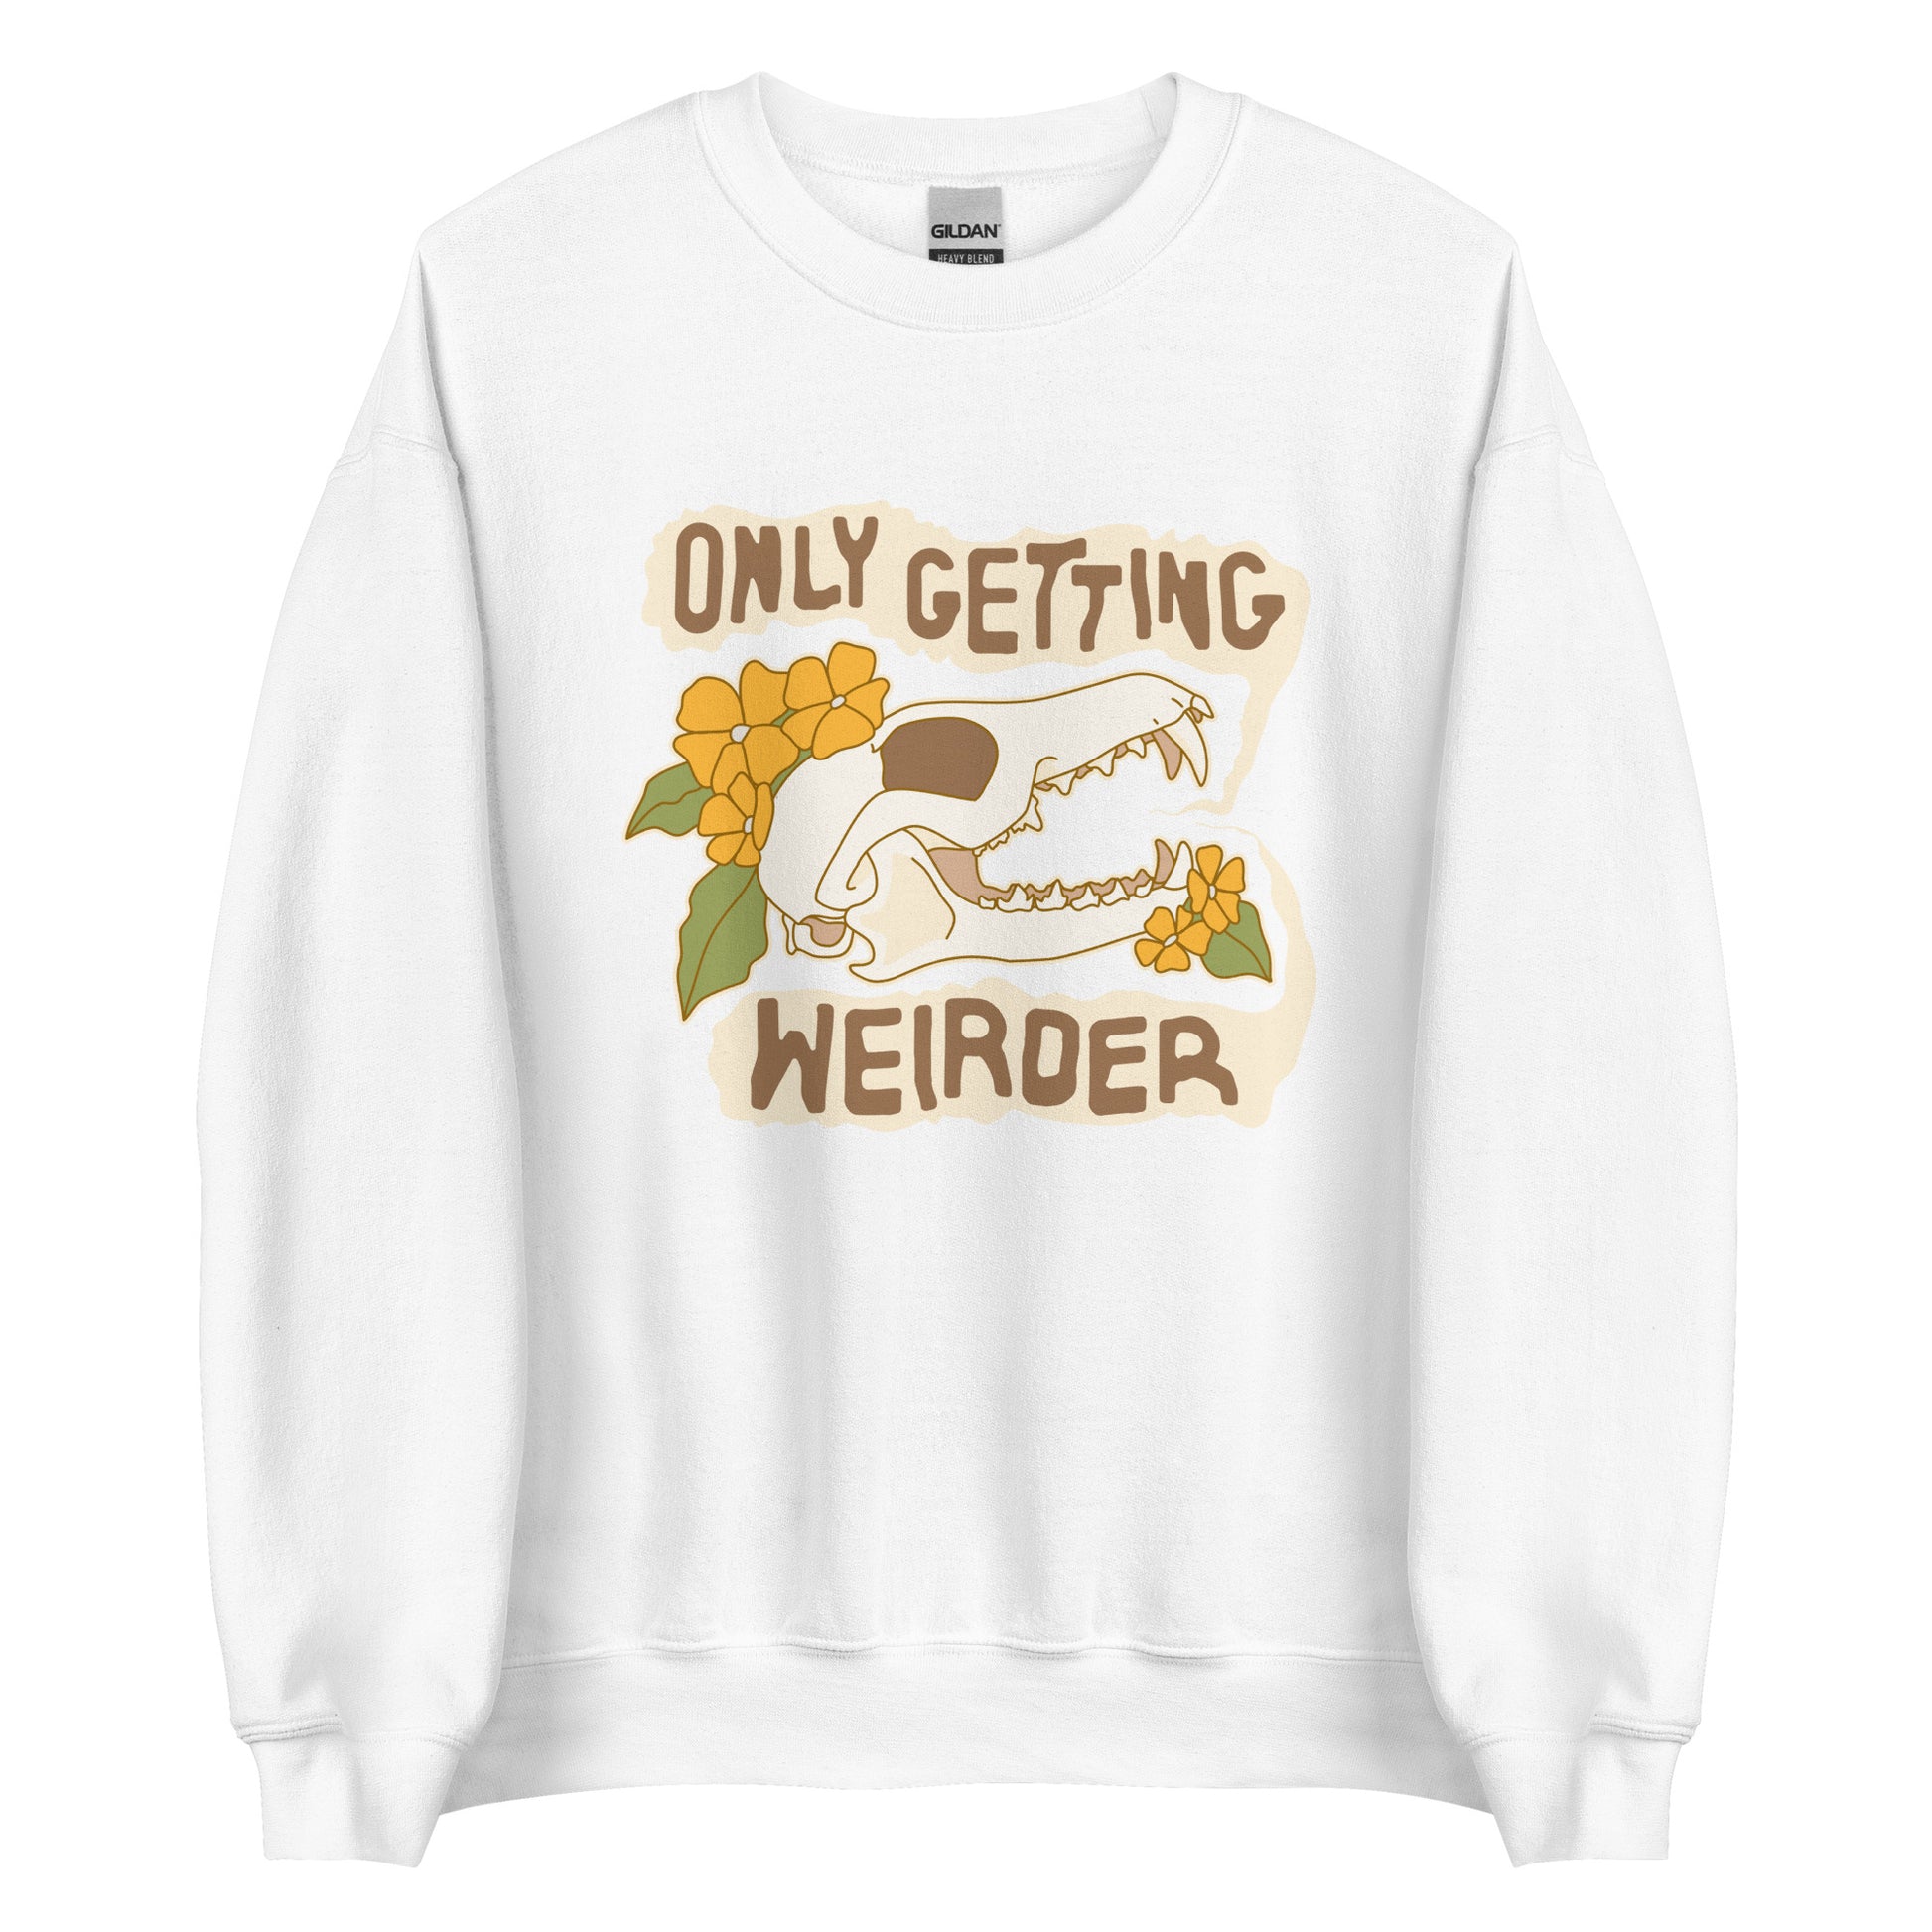 A white crewneck sweatshirt featuring an illustration of a fox skull surrounded by yellow flowers. Wobbly speech bubbles are coming from the fox's mouth. The text inside the bubbles reads "ONLY GETTING WEIRDER".